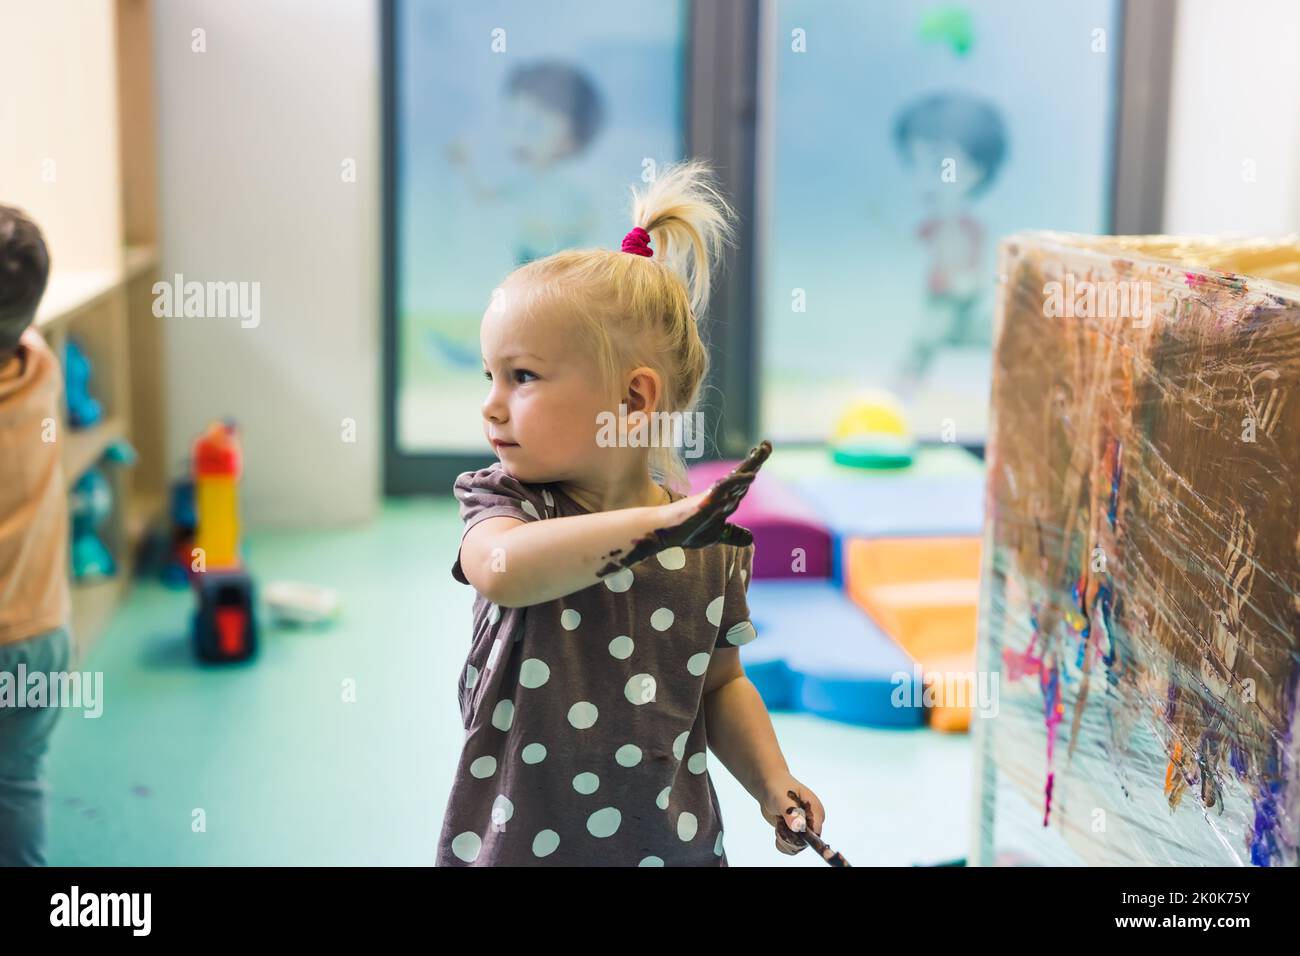 Cling film painting. Little caucasian girl toddler painting with her arms on a cling film wrapped all the way round the wooden shelf unit. Creative activity for kids development at the nursery school. High quality photo Stock Photo